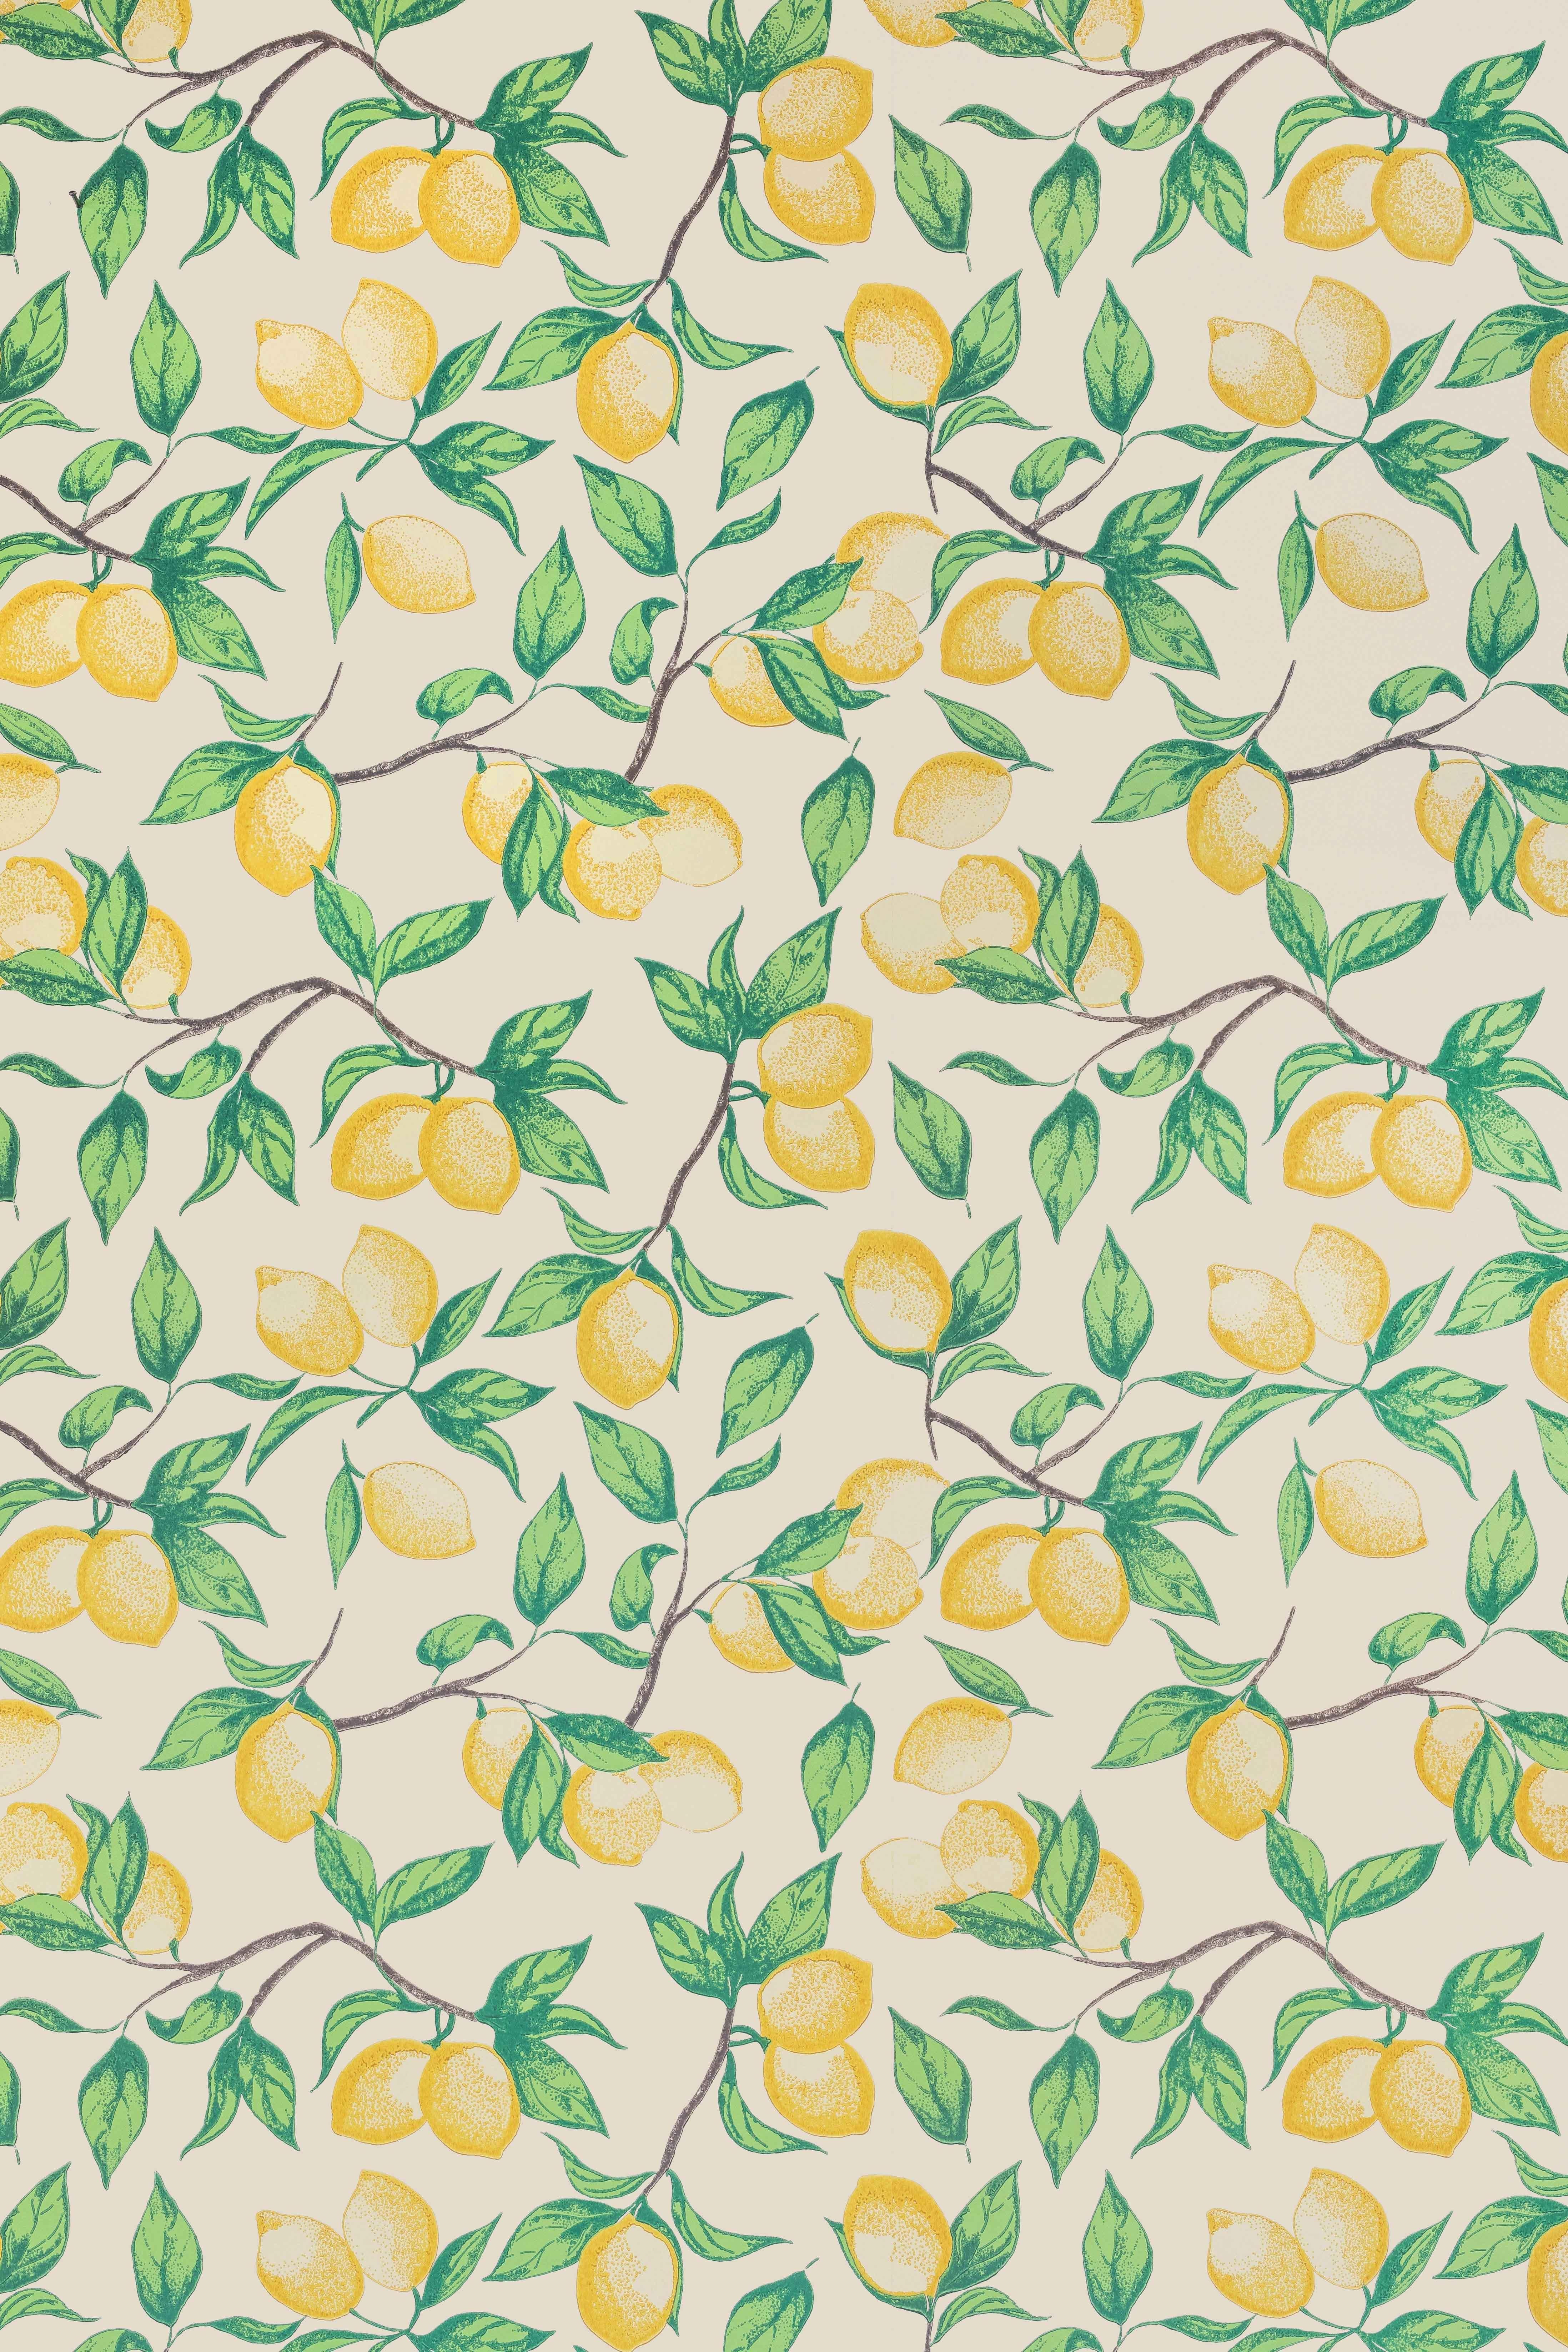 Color: Natural (also available in Azure blue)
Measures: Trim width 52cm/20.5 inches
Roll length 10m
Pattern repeat: Straight
Match length: 52cm/20.5 inches



Evoking lazy days beneath a pergola on the Amalfi coast, Capri Lemons is available